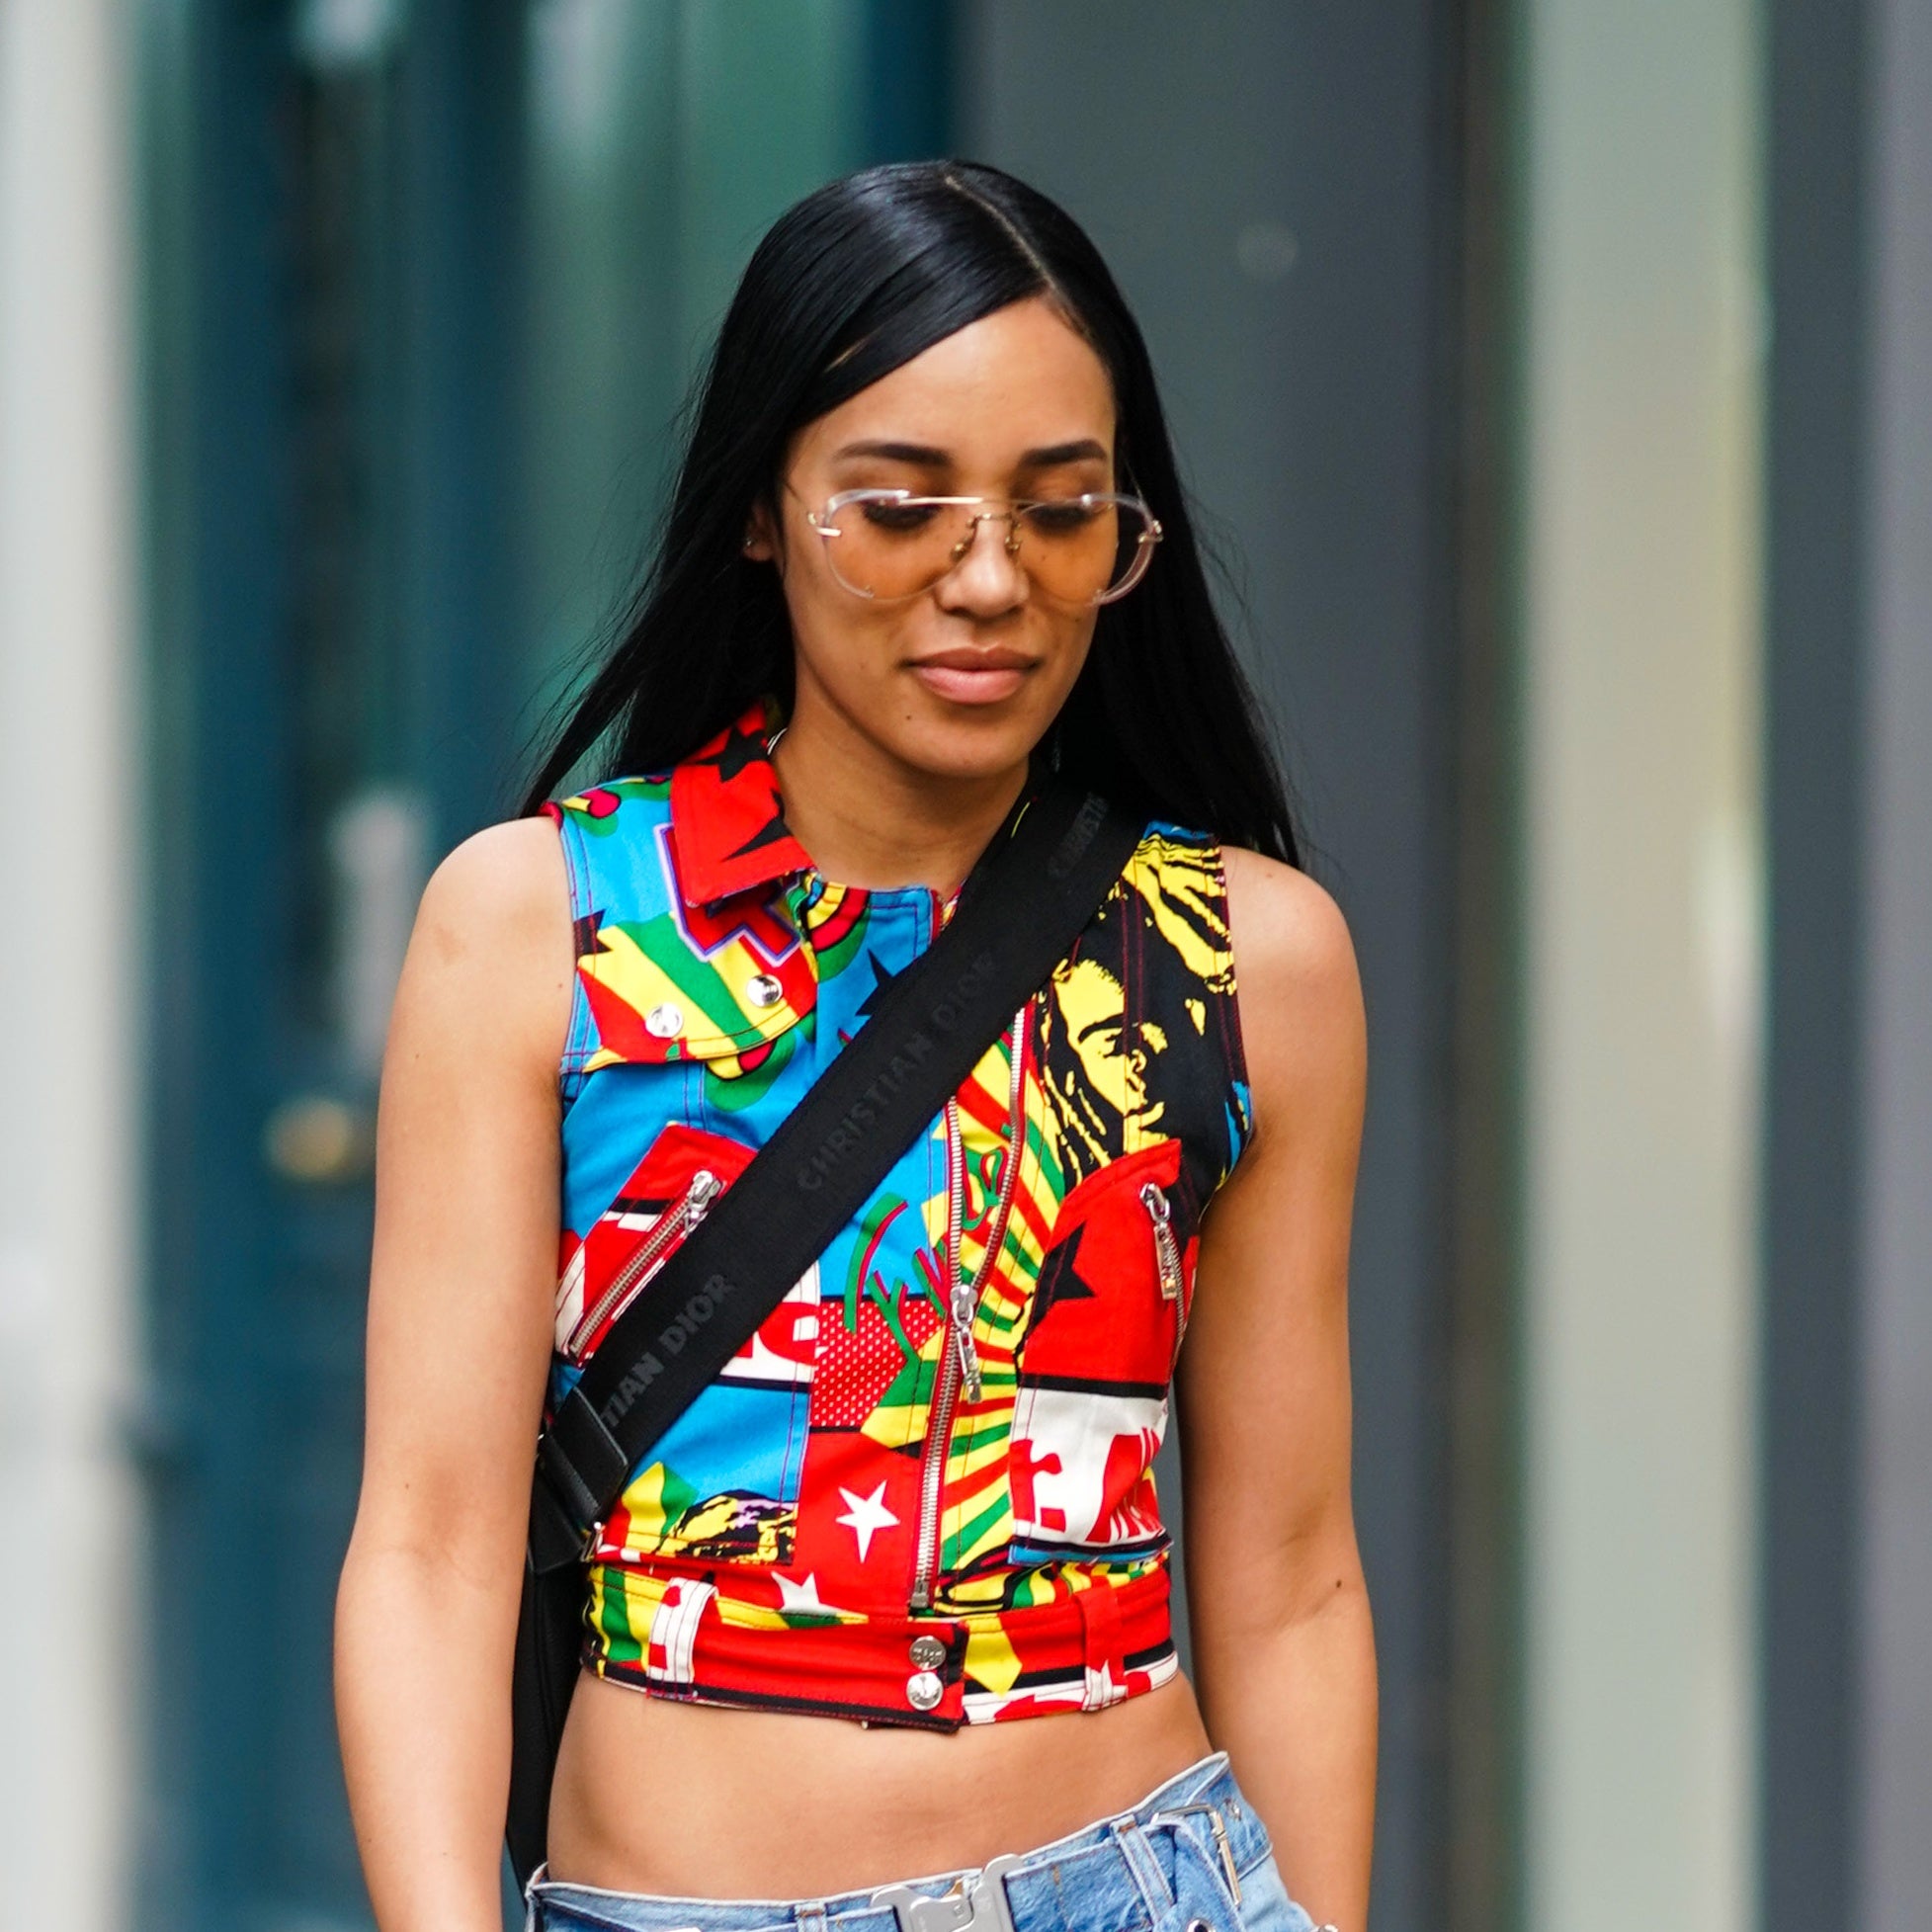 Our September "It Girl" Is Streetstyle Maven Aleali May